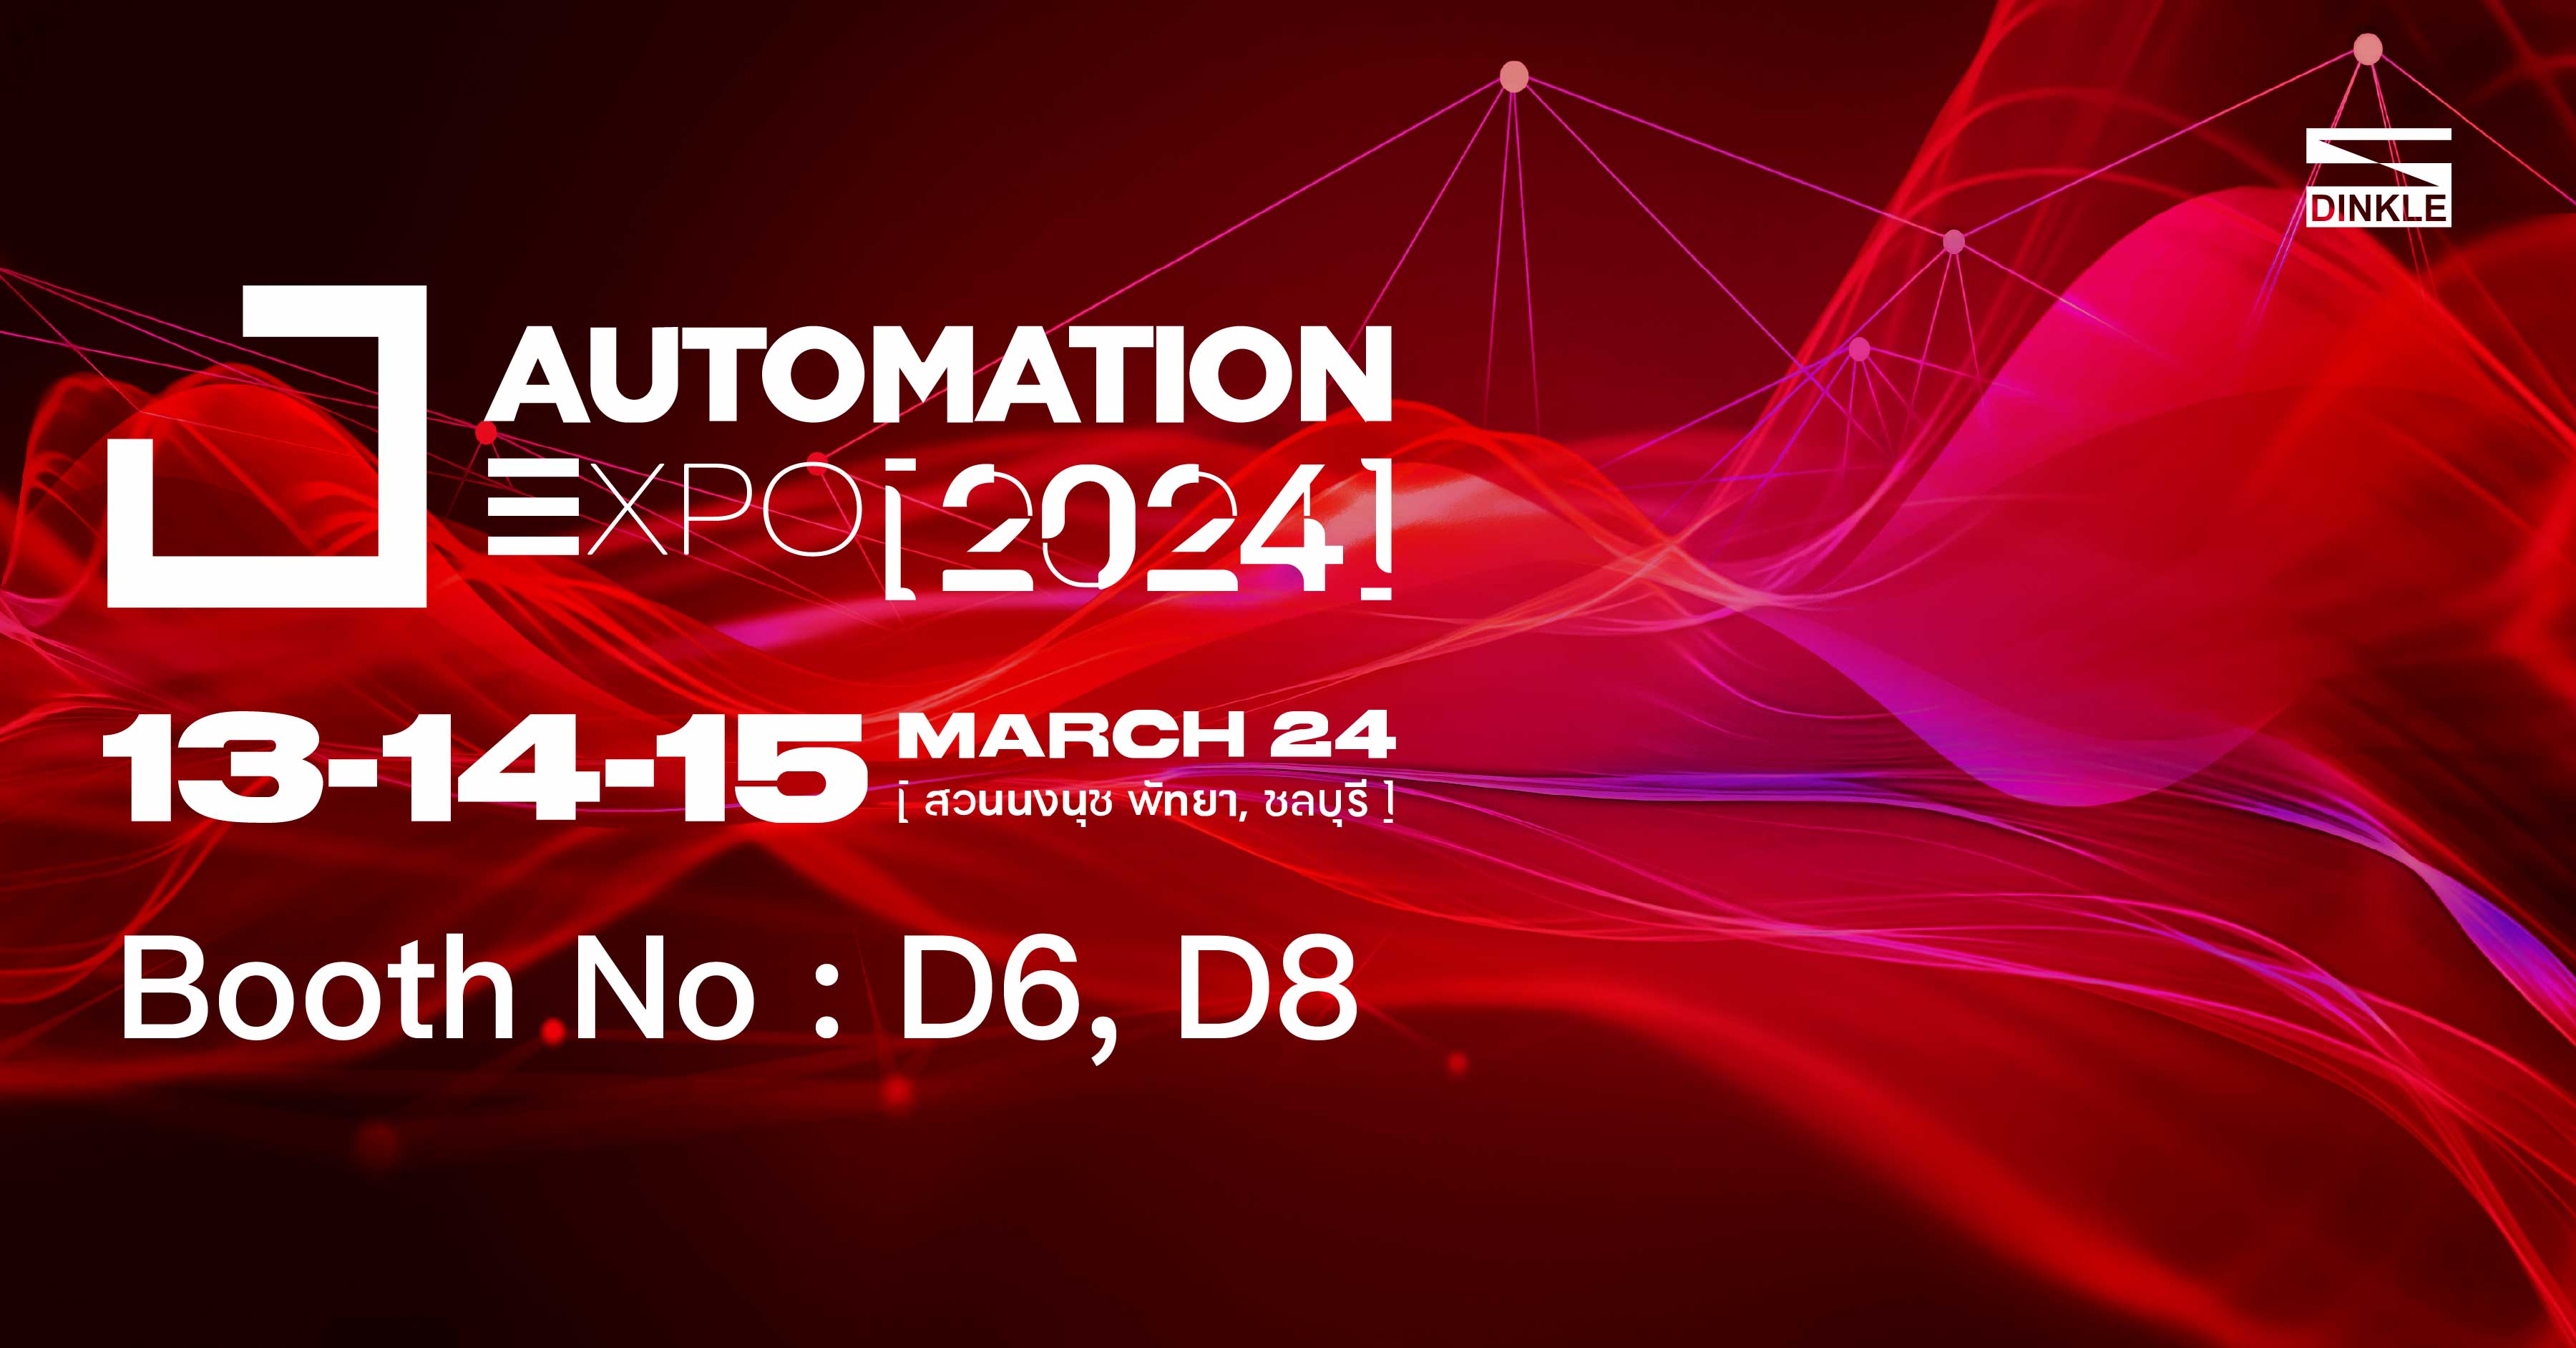 Dinkle Corporation makes its debut at the Thailand AUTOMATION EXPO 2024, showcasing comprehensive solutions for smart manufacturing and industrial automation